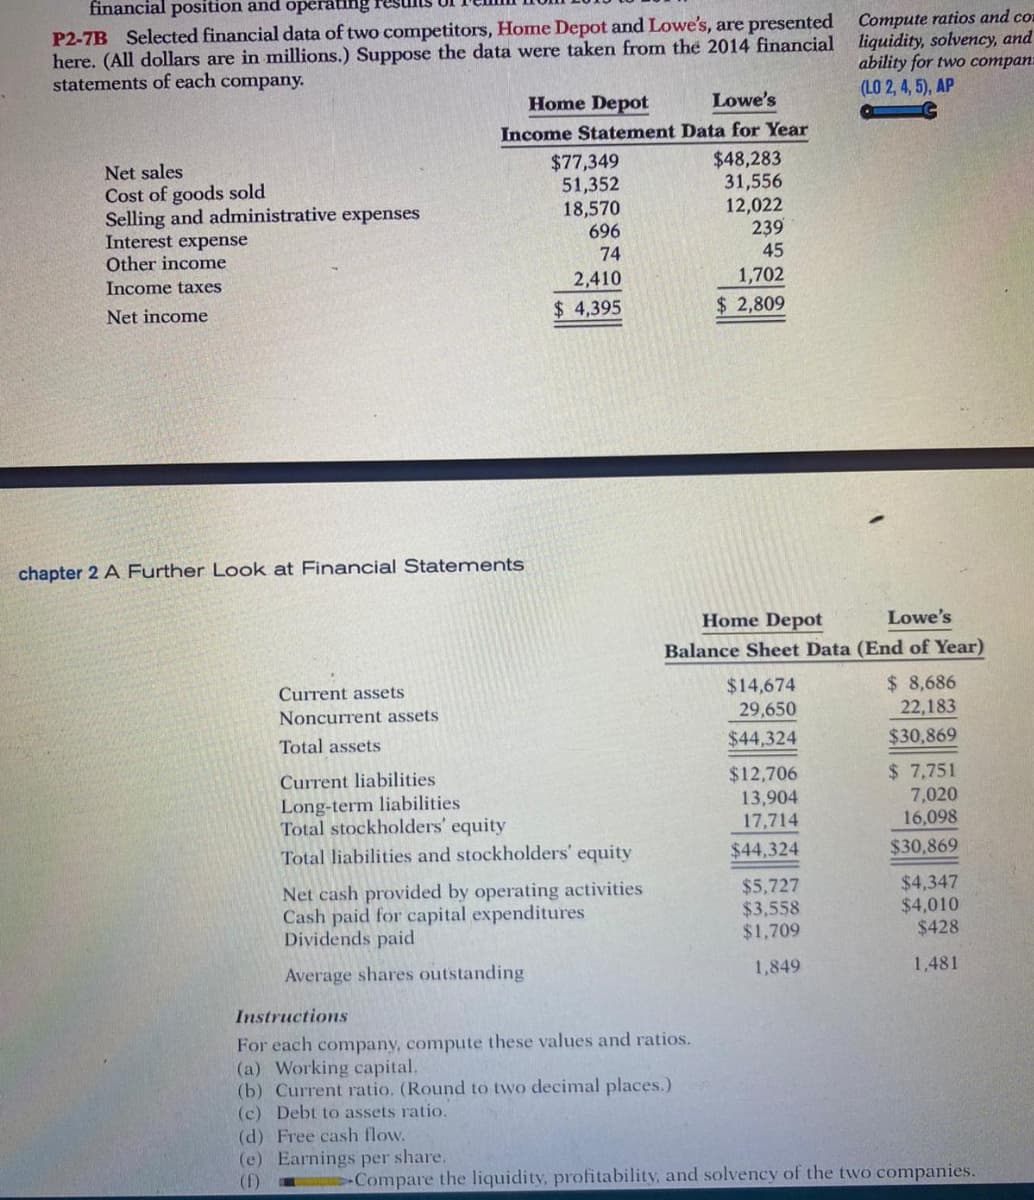 financial position and operating
P2-7B Selected financial data of two competitors, Home Depot and Lowe's, are presented Compute ratios and co
here. (All dollars are in millions.) Suppose the data were taken from the 2014 financial
statements of each company.
liquidity, solvency, and
ability for two compan:
(LO 2, 4, 5), AP
Home Depot
Lowe's
Income Statement Data for Year
$77,349
51,352
$48,283
31,556
12,022
239
Net sales
Cost of goods sold
Selling and administrative expenses
Interest expense
Other income
18,570
696
74
45
Income taxes
2,410
1,702
Net income
$ 4,395
$ 2,809
chapter 2 A Further Look at Financial Statements
Home Depot
Lowe's
Balance Sheet Data (End of Year)
$14,674
29,650
$ 8,686
22,183
Current assets
Noncurrent assets
Total assets
$44,324
$30,869
$ 7,751
$12,706
13,904
17,714
Current liabilities
Long-term liabilities
Total stockholders' equity
Total liabilities and stockholders' equity
7,020
16,098
$44,324
$30,869
Net cash provided by operating activities
Cash paid for capital expenditures
Dividends paid
$5,727
$3,558
$1,709
$4,347
$4,010
$428
Average shares outstanding
1,849
1,481
Instructions
For each company, compute these values and ratios.
(a) Working capital.
(b) Current ratio. (Round to two decimal places.)
(c) Debt to assets ratio.
(d) Free cash flow.
(e) Earnings per share.
(f)
Compare the liquidity, profitability, and solvency of the two companies.
